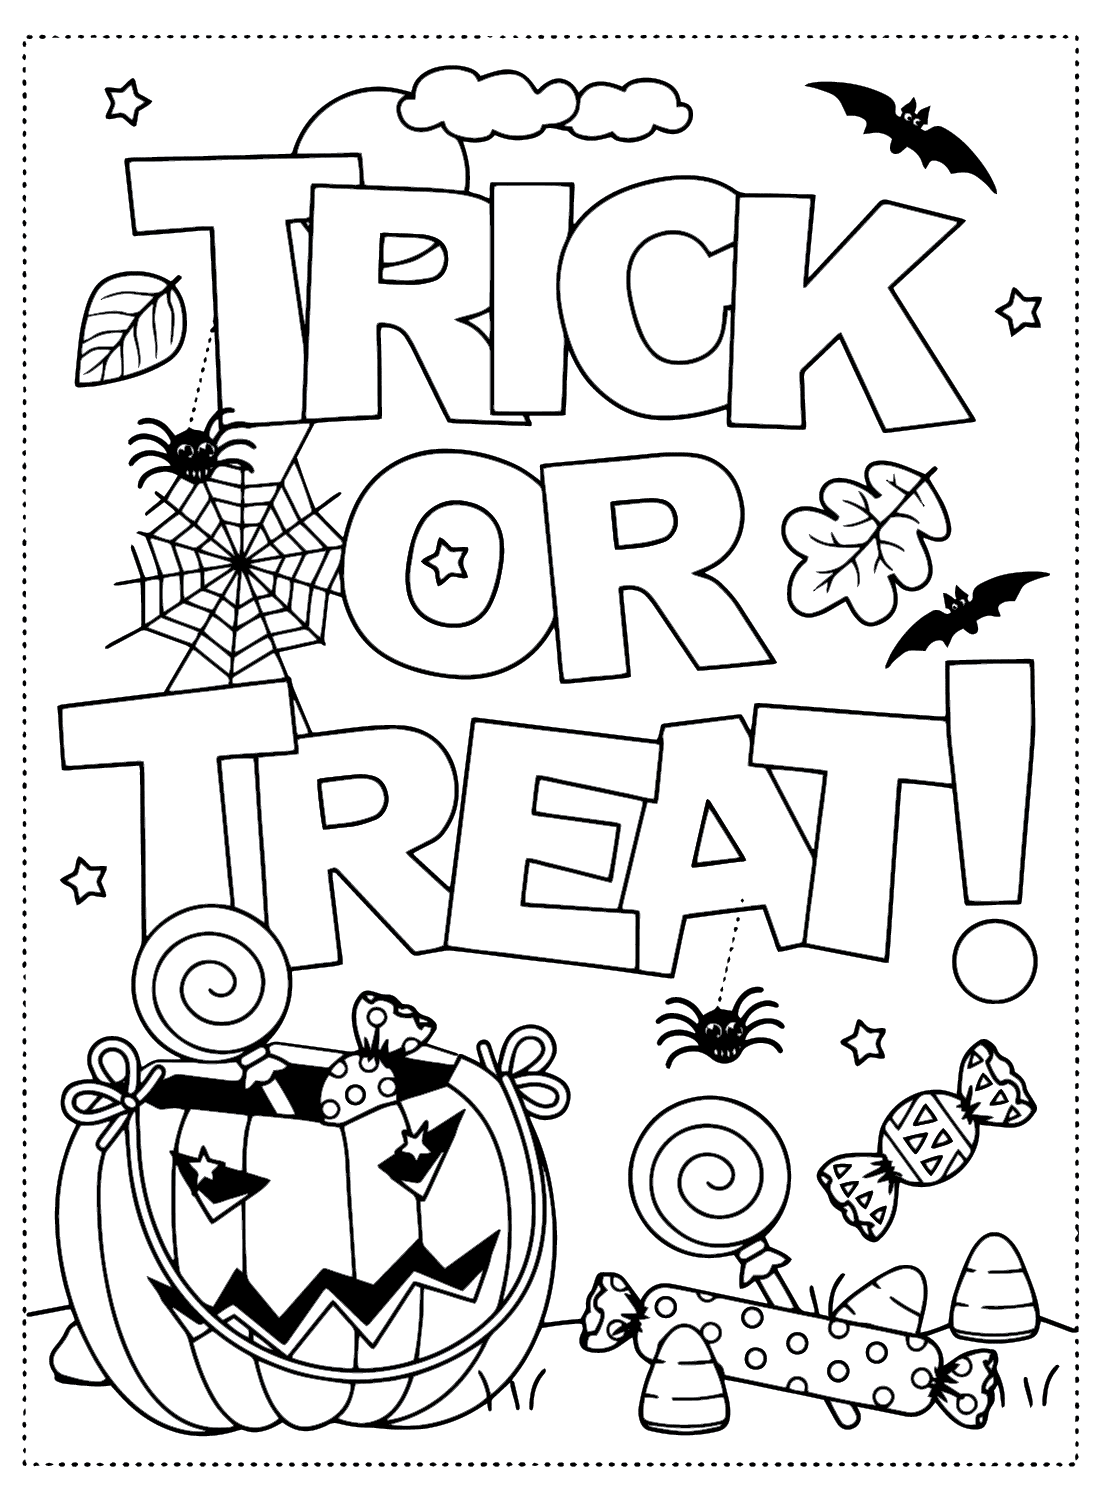 Trick or Treat Coloring Pages to Download